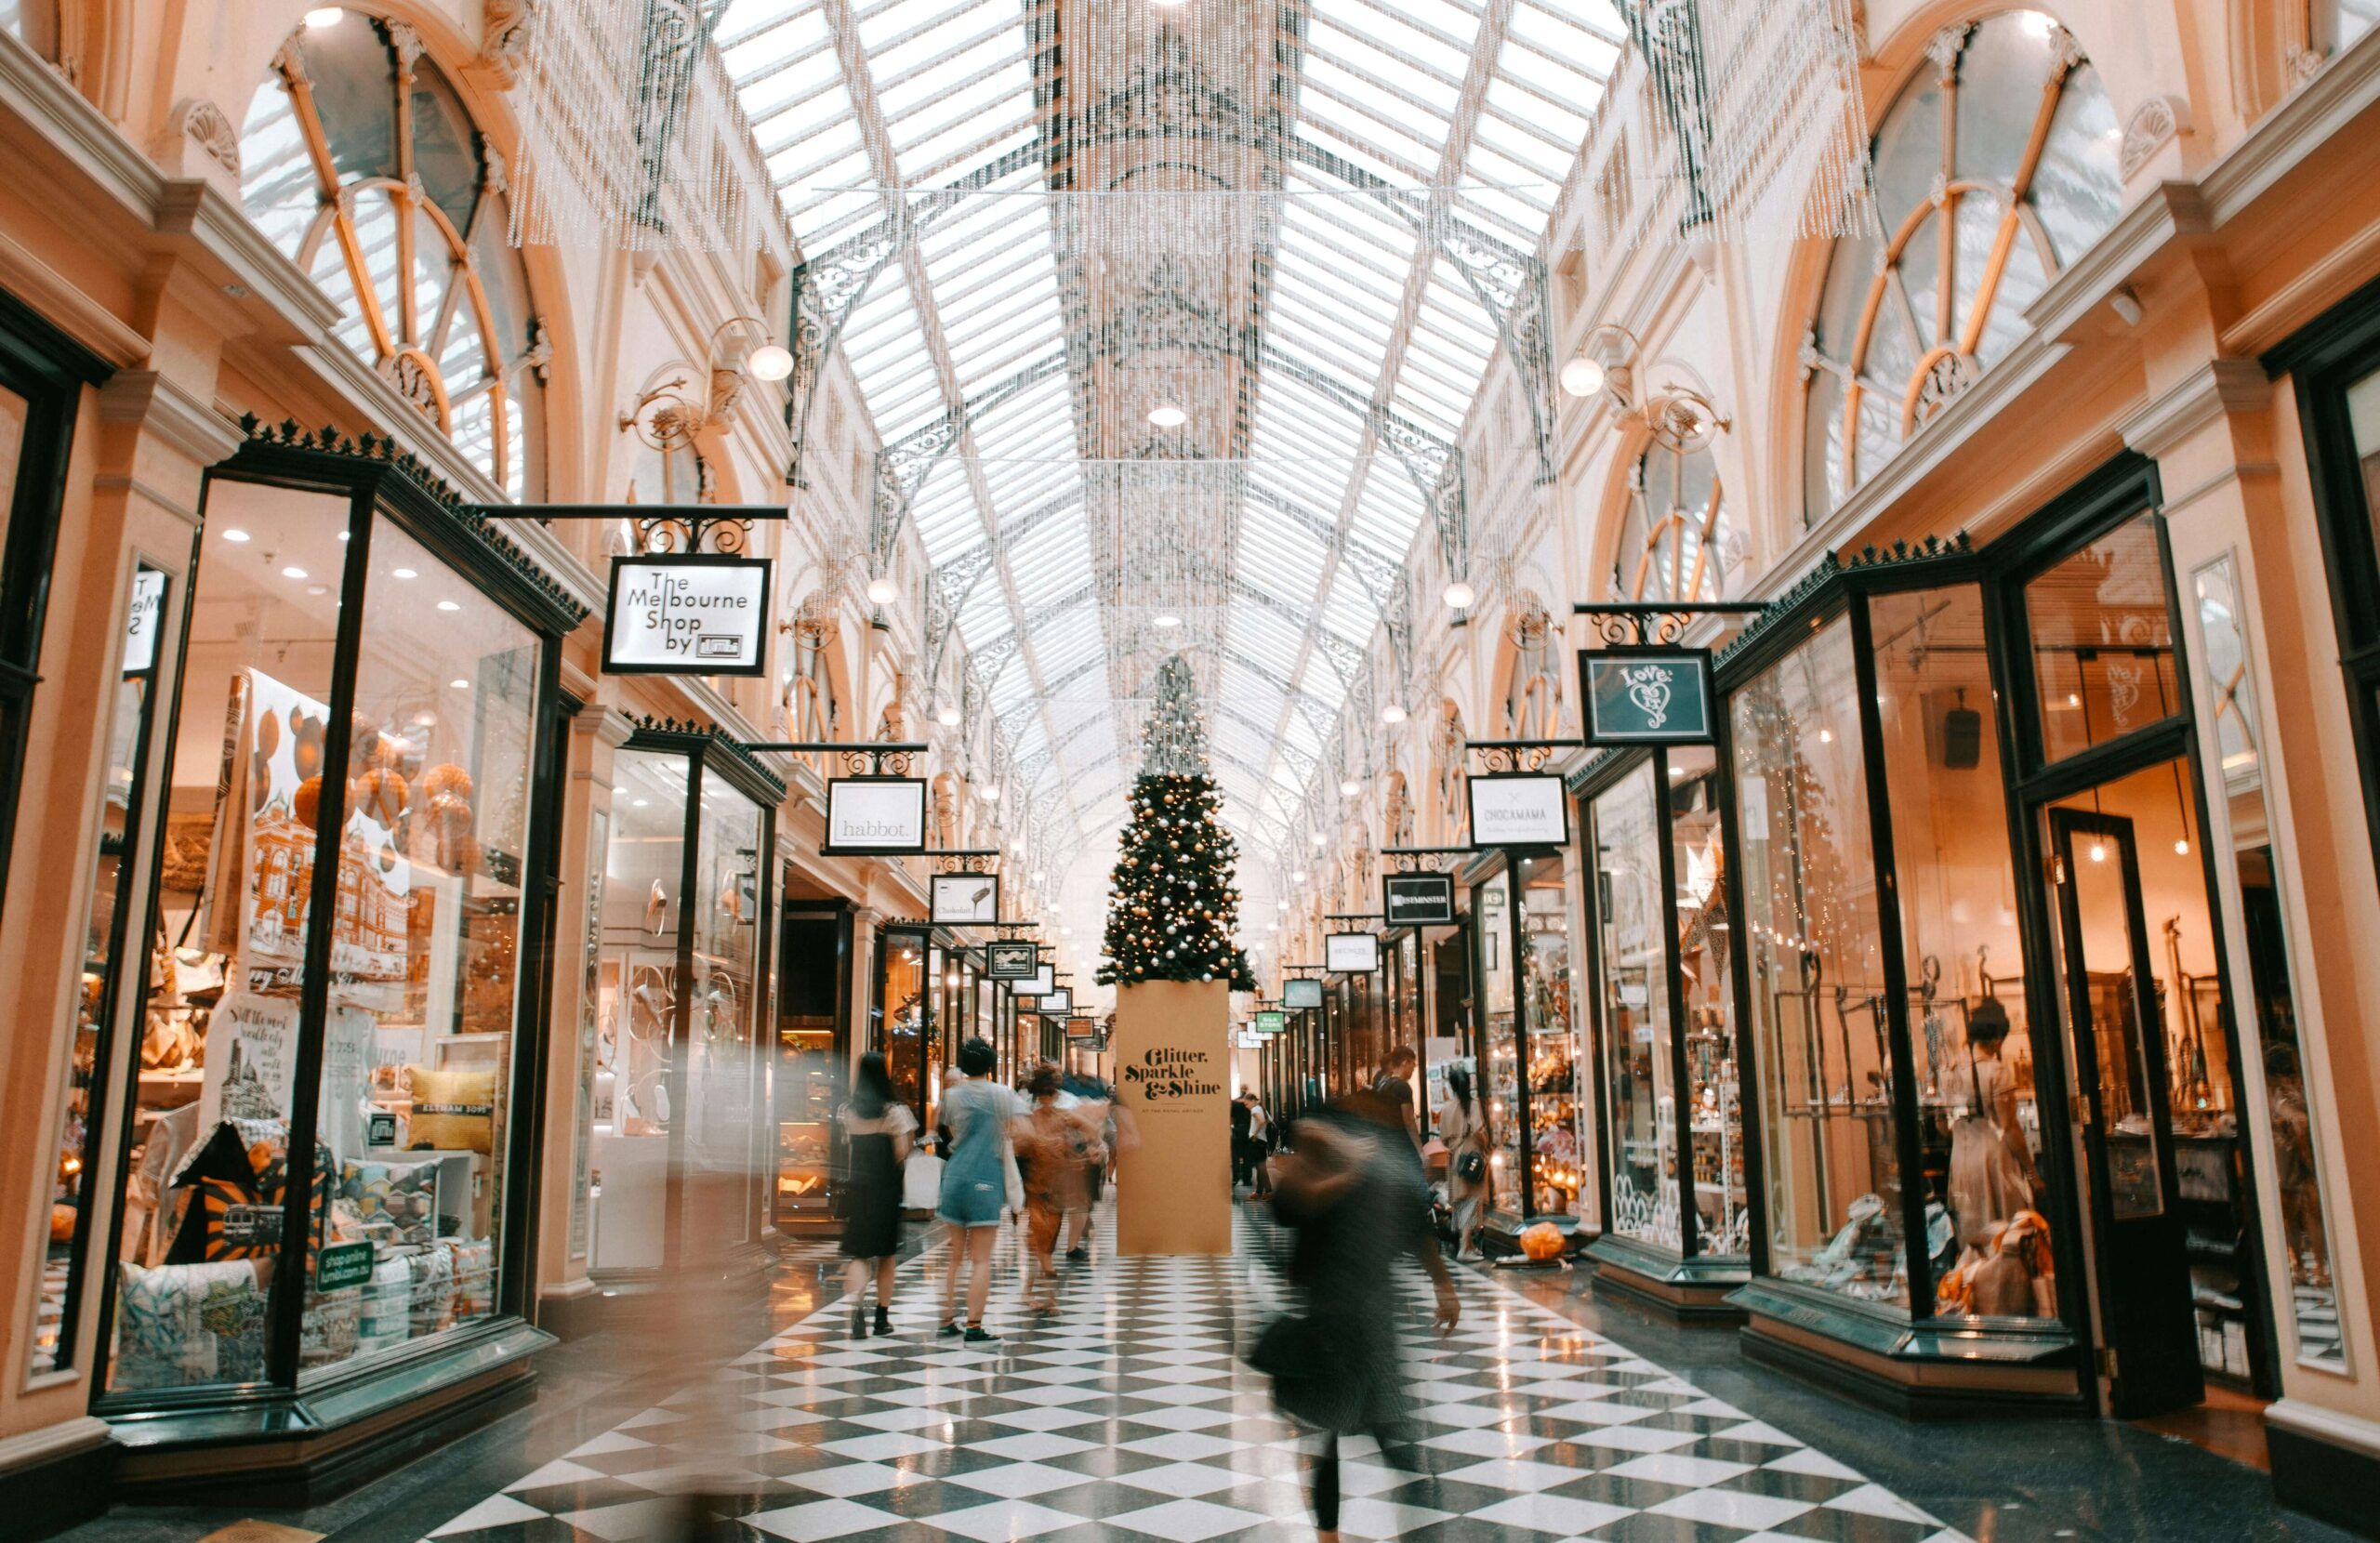 ustling indoor shopping arcade with a glass ceiling and holiday decorations, highlighting a busy retail atmosphere in the holidays season